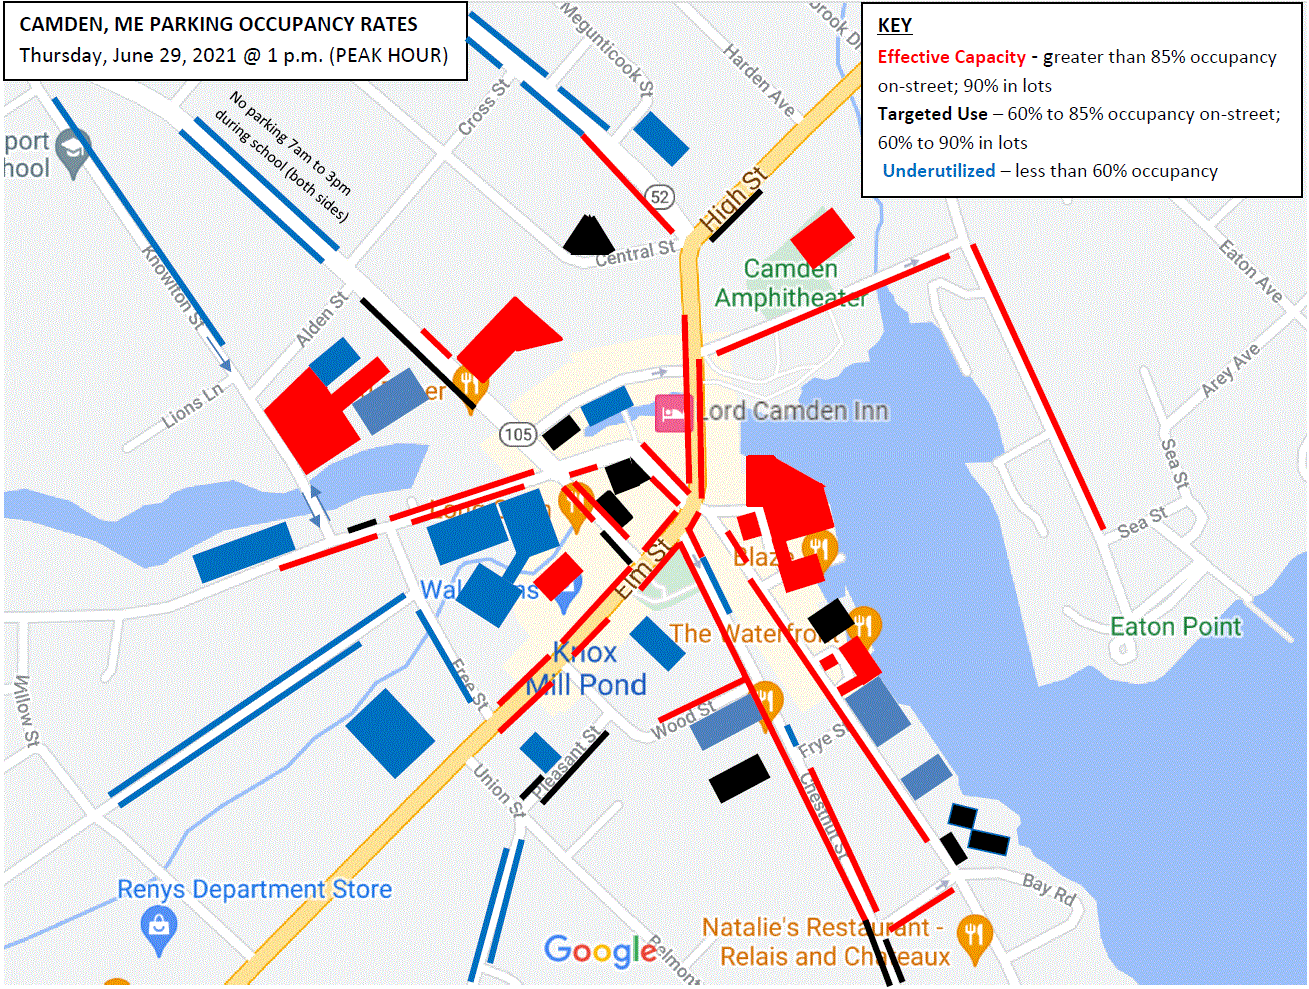 06-29-2021 1pm Parking Occupancy Rates